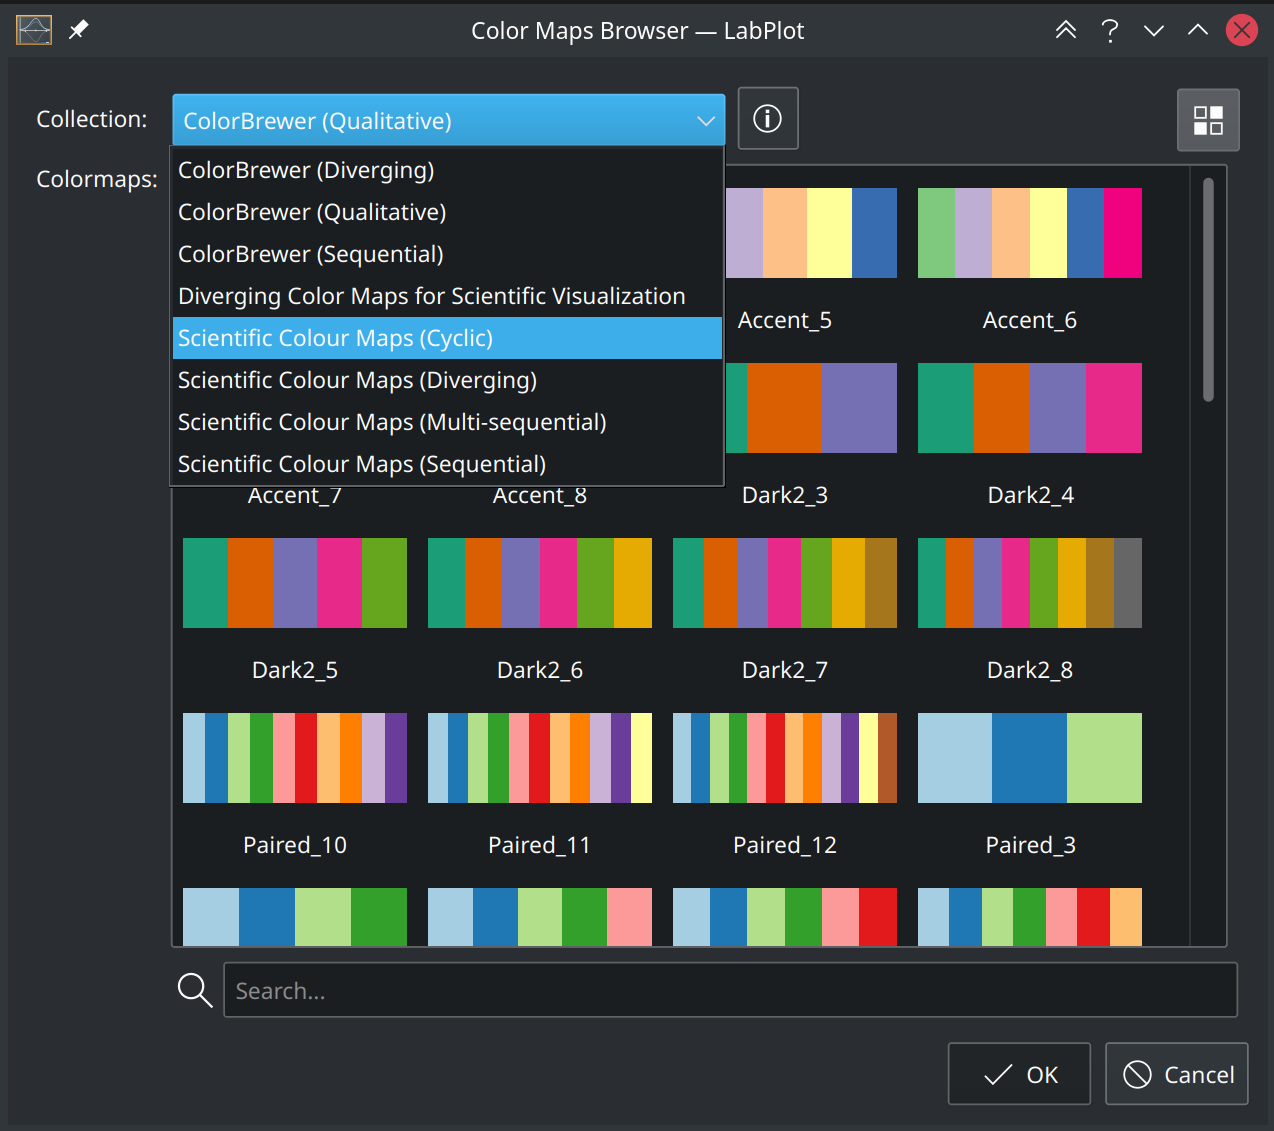 Collection List in the Color Maps Browser